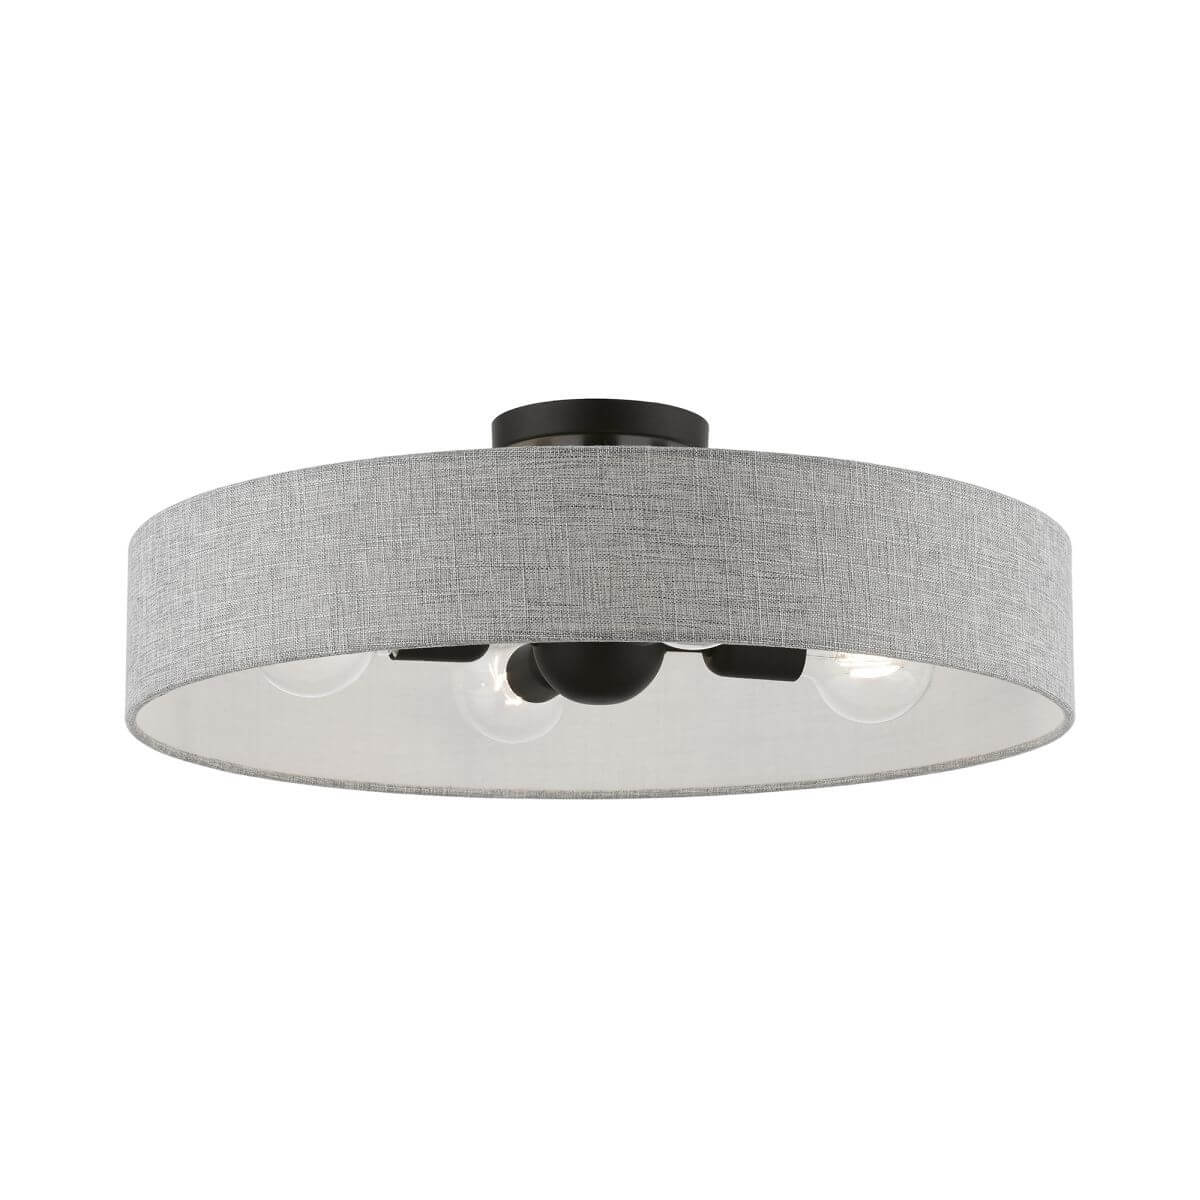 4 Light 22 inch Semi-Flush Mount in Black with Hand Crafted Urban Gray Hardback Fabric Shade - White Inside - 245216